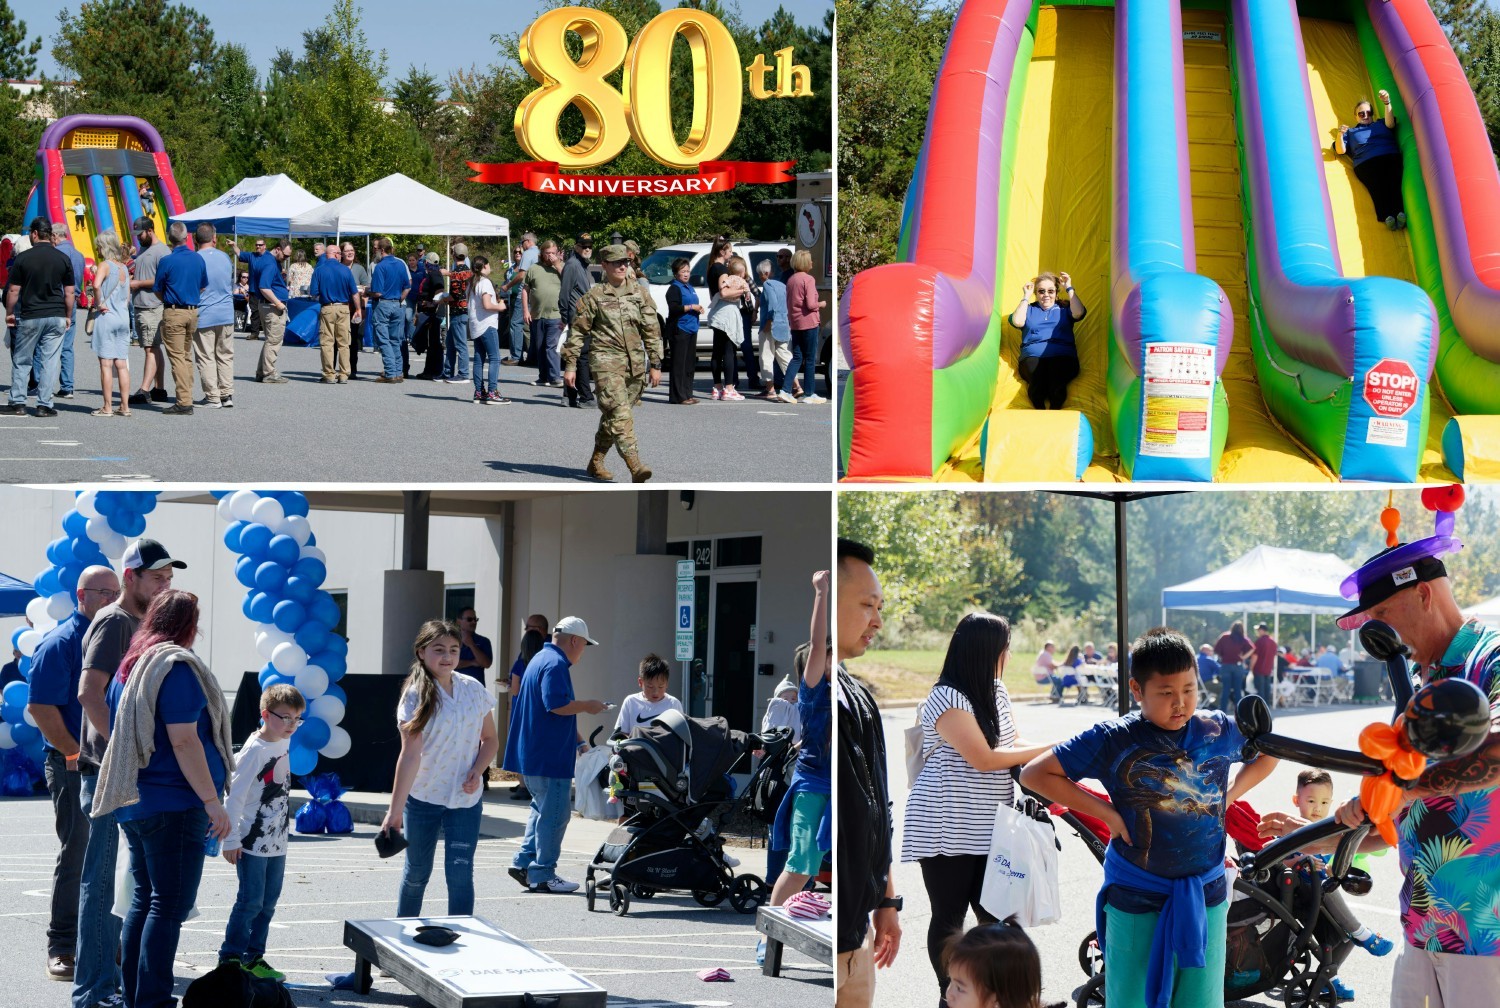 DAE 80th Anniversary - Employees, Their Families, Friends & Community Partners